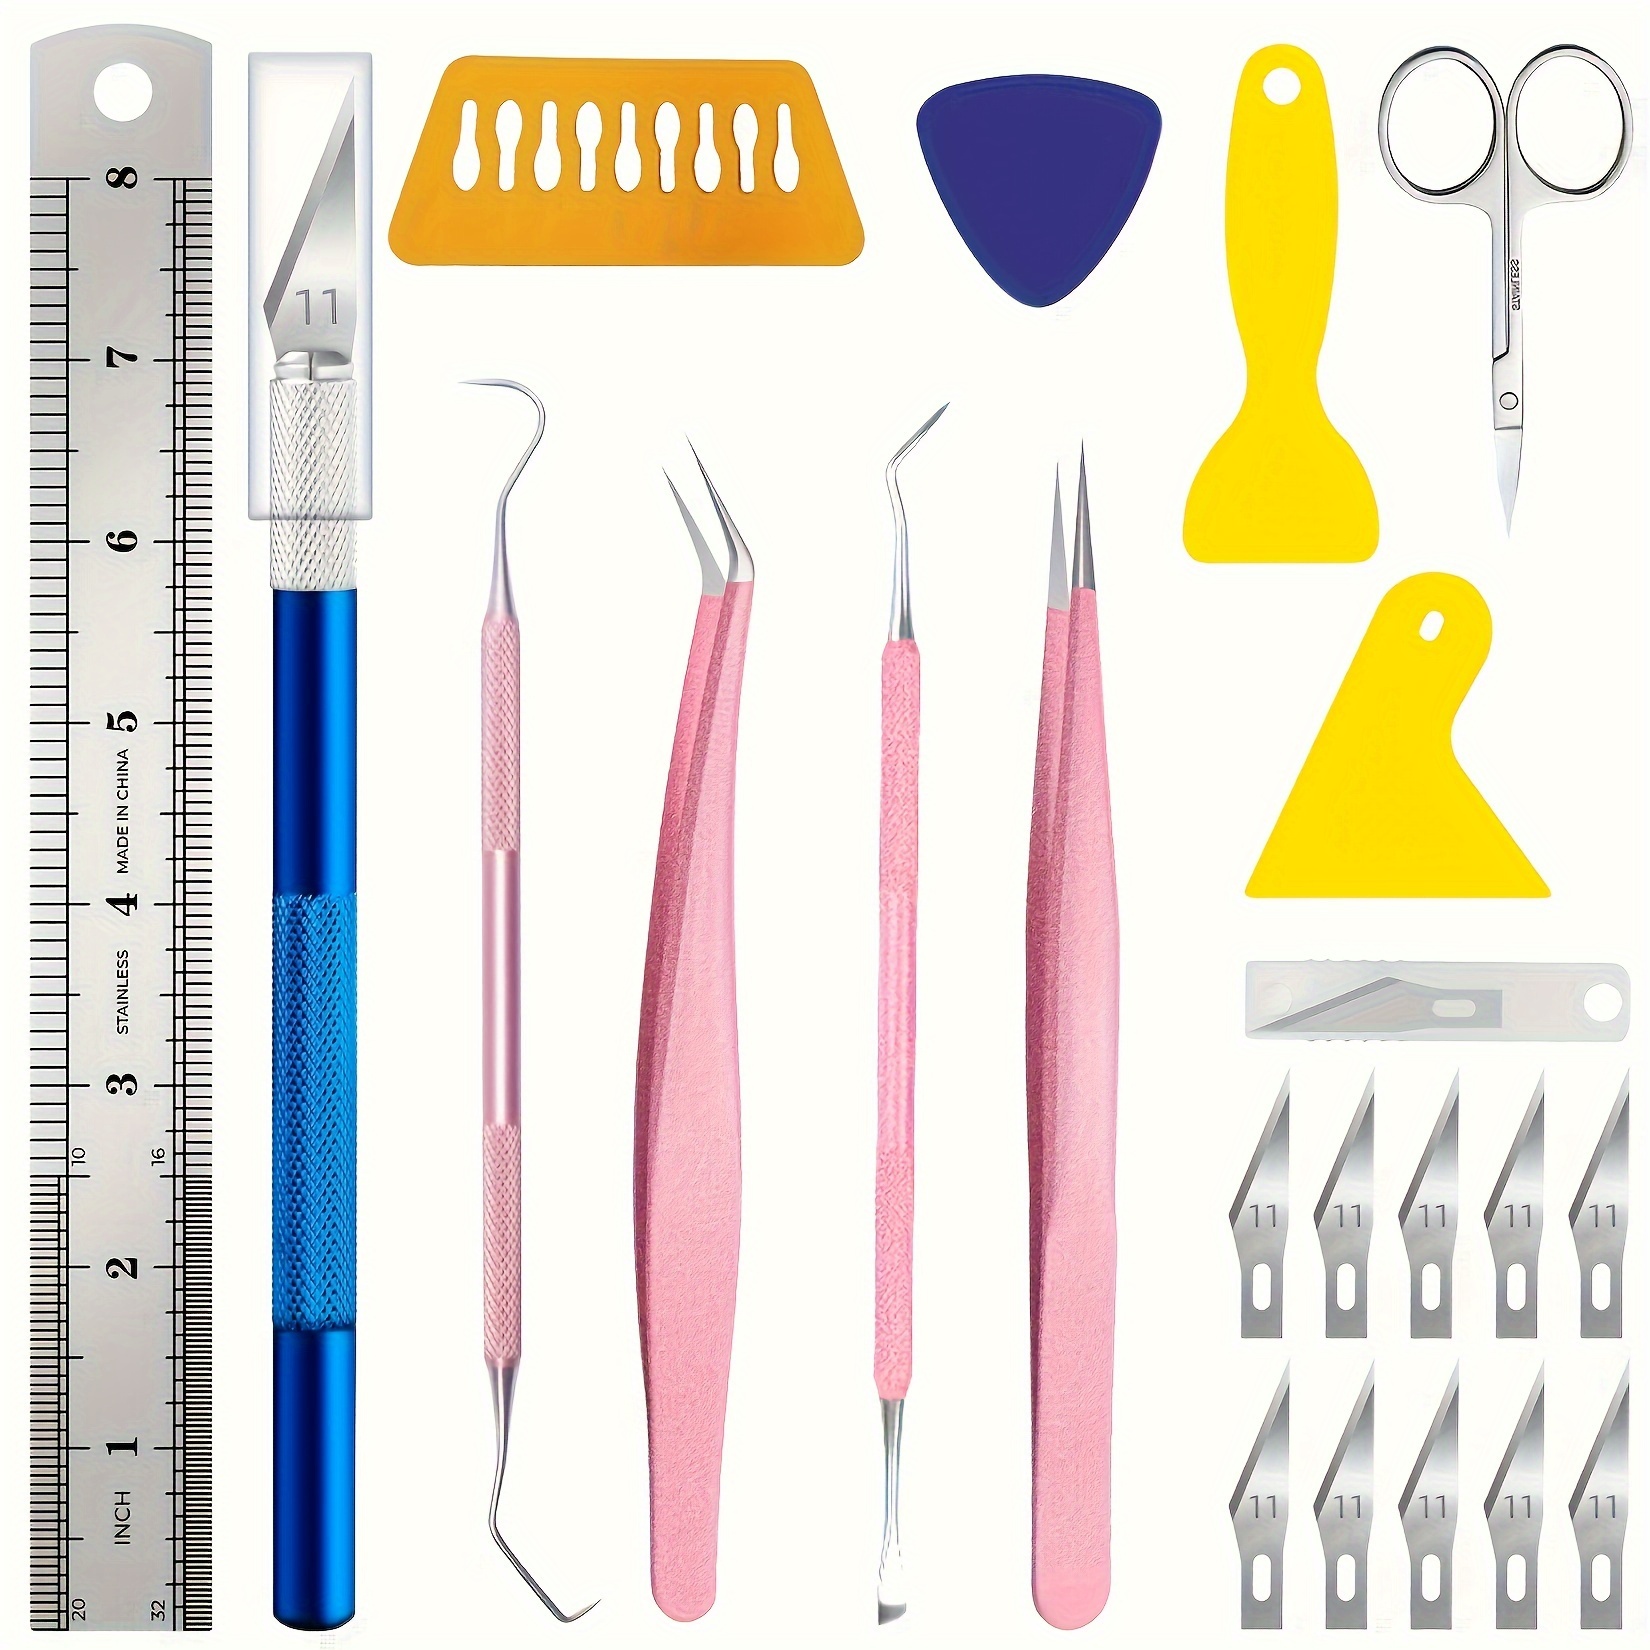 

21-piece Vinyl Weeding Tools Set For Scrapbooking - Precision Craft & Diy Art Tool Kit, Pink - Handheld, Manual Crafting Accessories, No Electricity Required